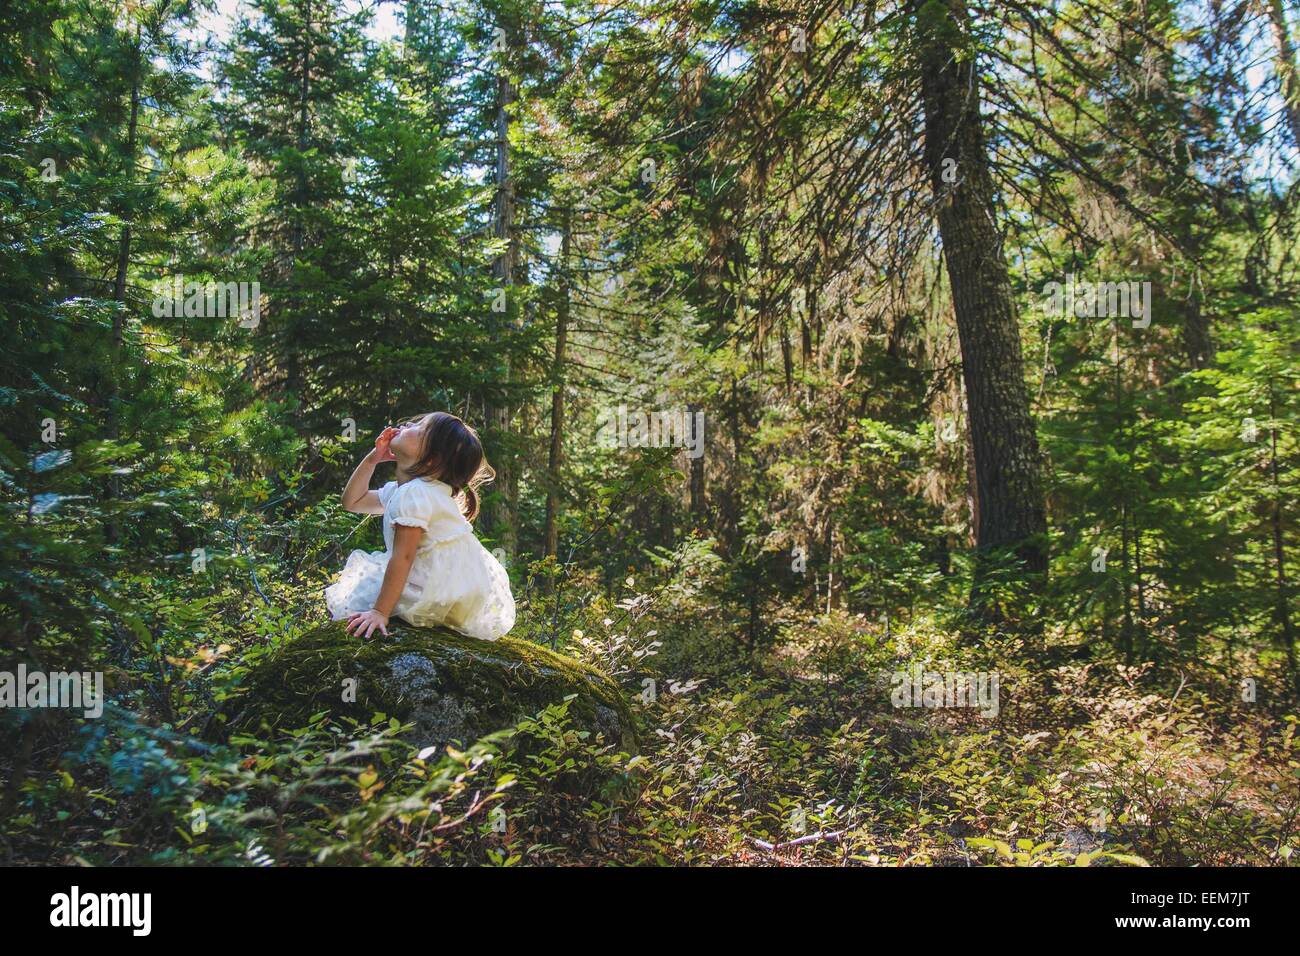 Girl sitting on a rock in the forest, USA Stock Photo